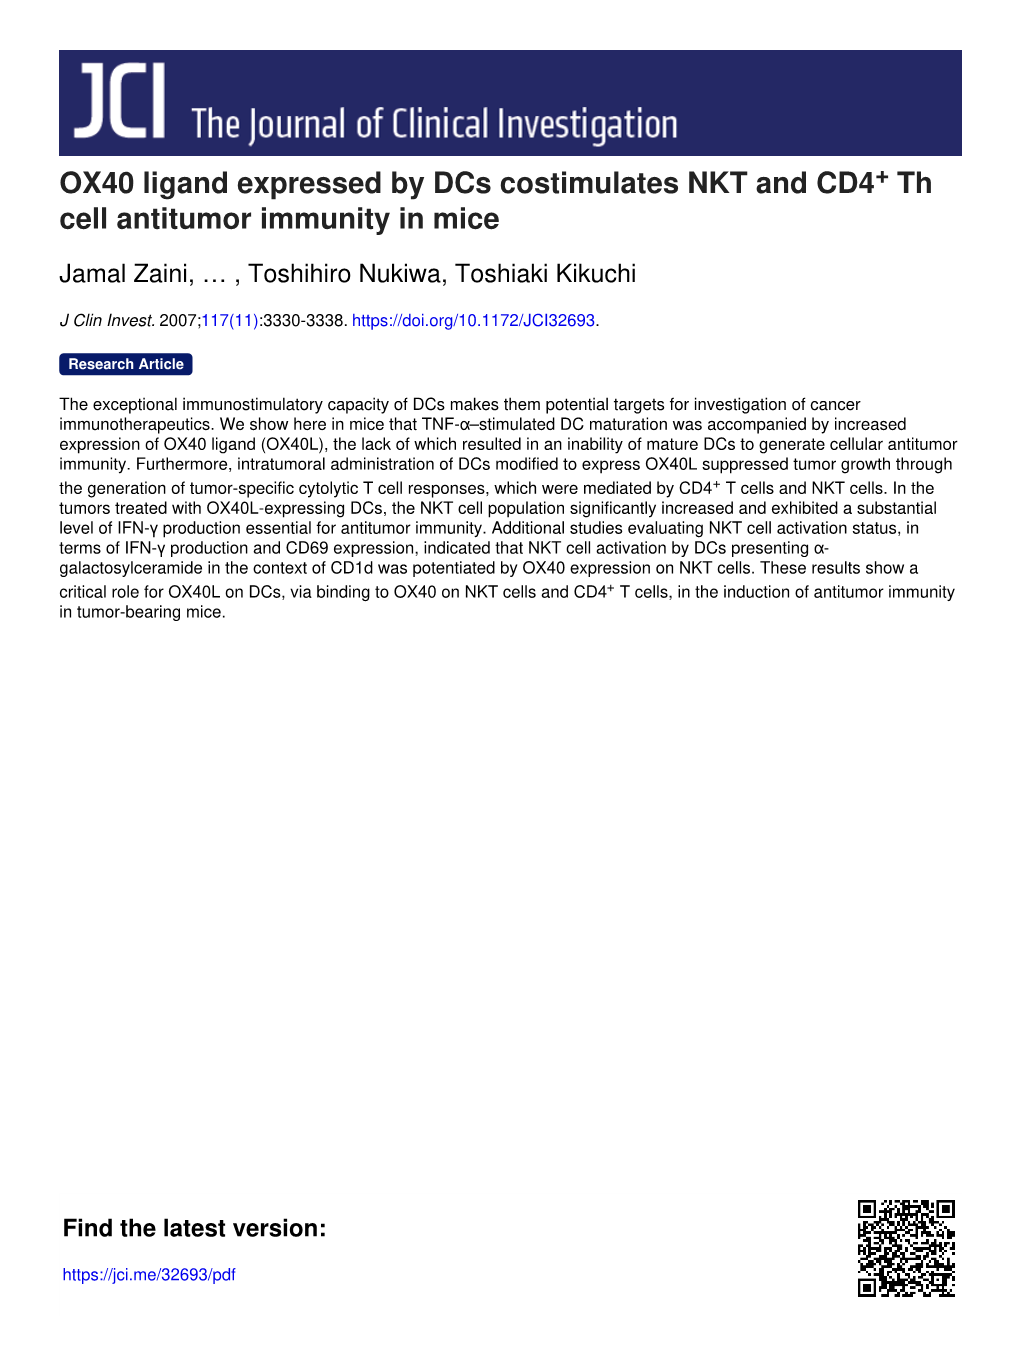 OX40 Ligand Expressed by Dcs Costimulates NKT and CD4 Th Cell Antitumor Immunity in Mice